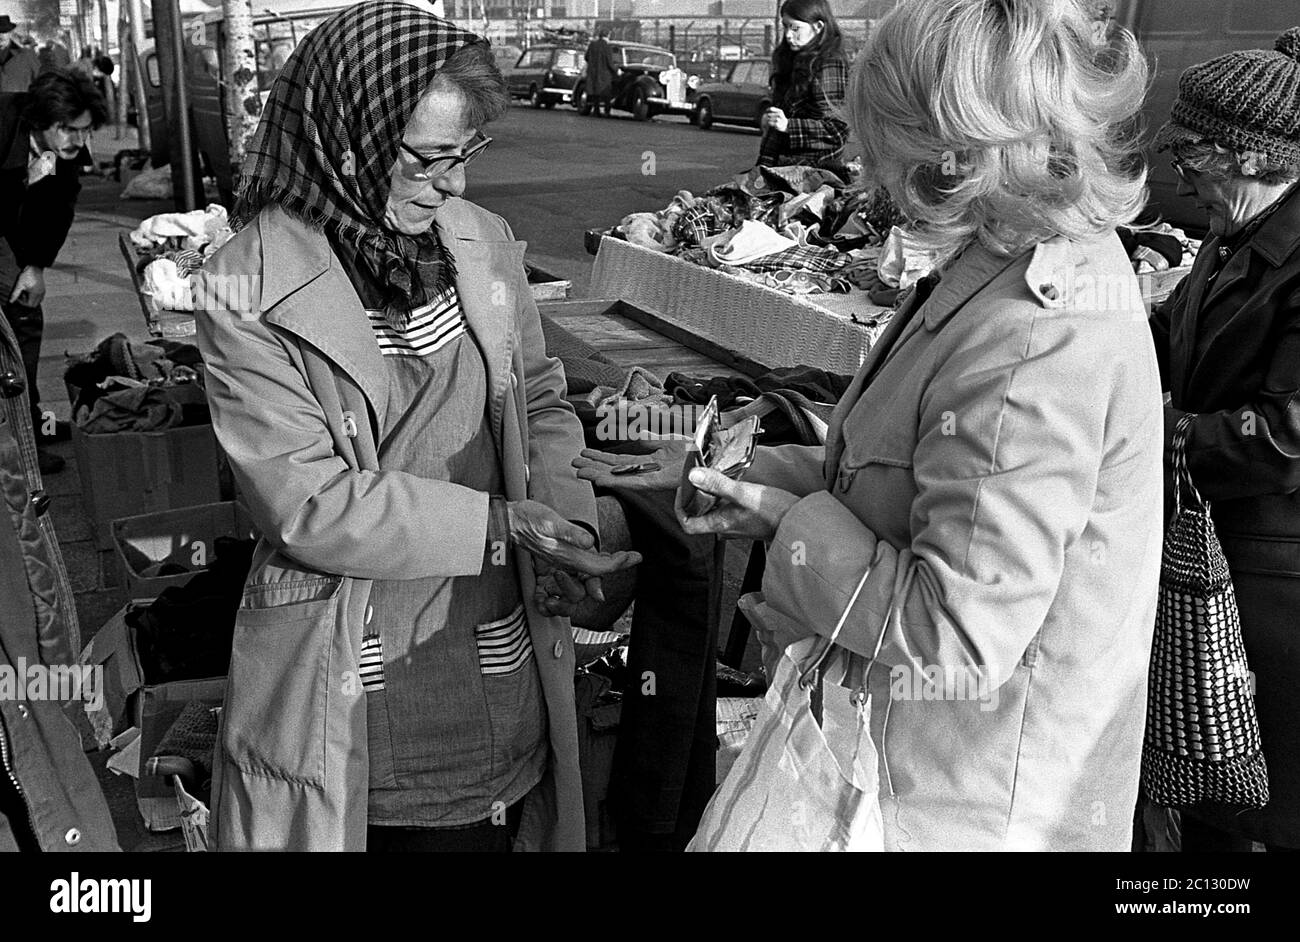 AJAXNETPHOTO. 27TH FEBRUARY, 1975. PORTSMOUTH, ENGLAND. - FLEA MARKET - IN UNICORN ROAD; A BUYER HANDS OVER A FEW COINS TO STREET TRADER (LEFT).PHOTO:JONATHAN EASTLAND/AJAX REF:7513 25A 110 Stock Photo